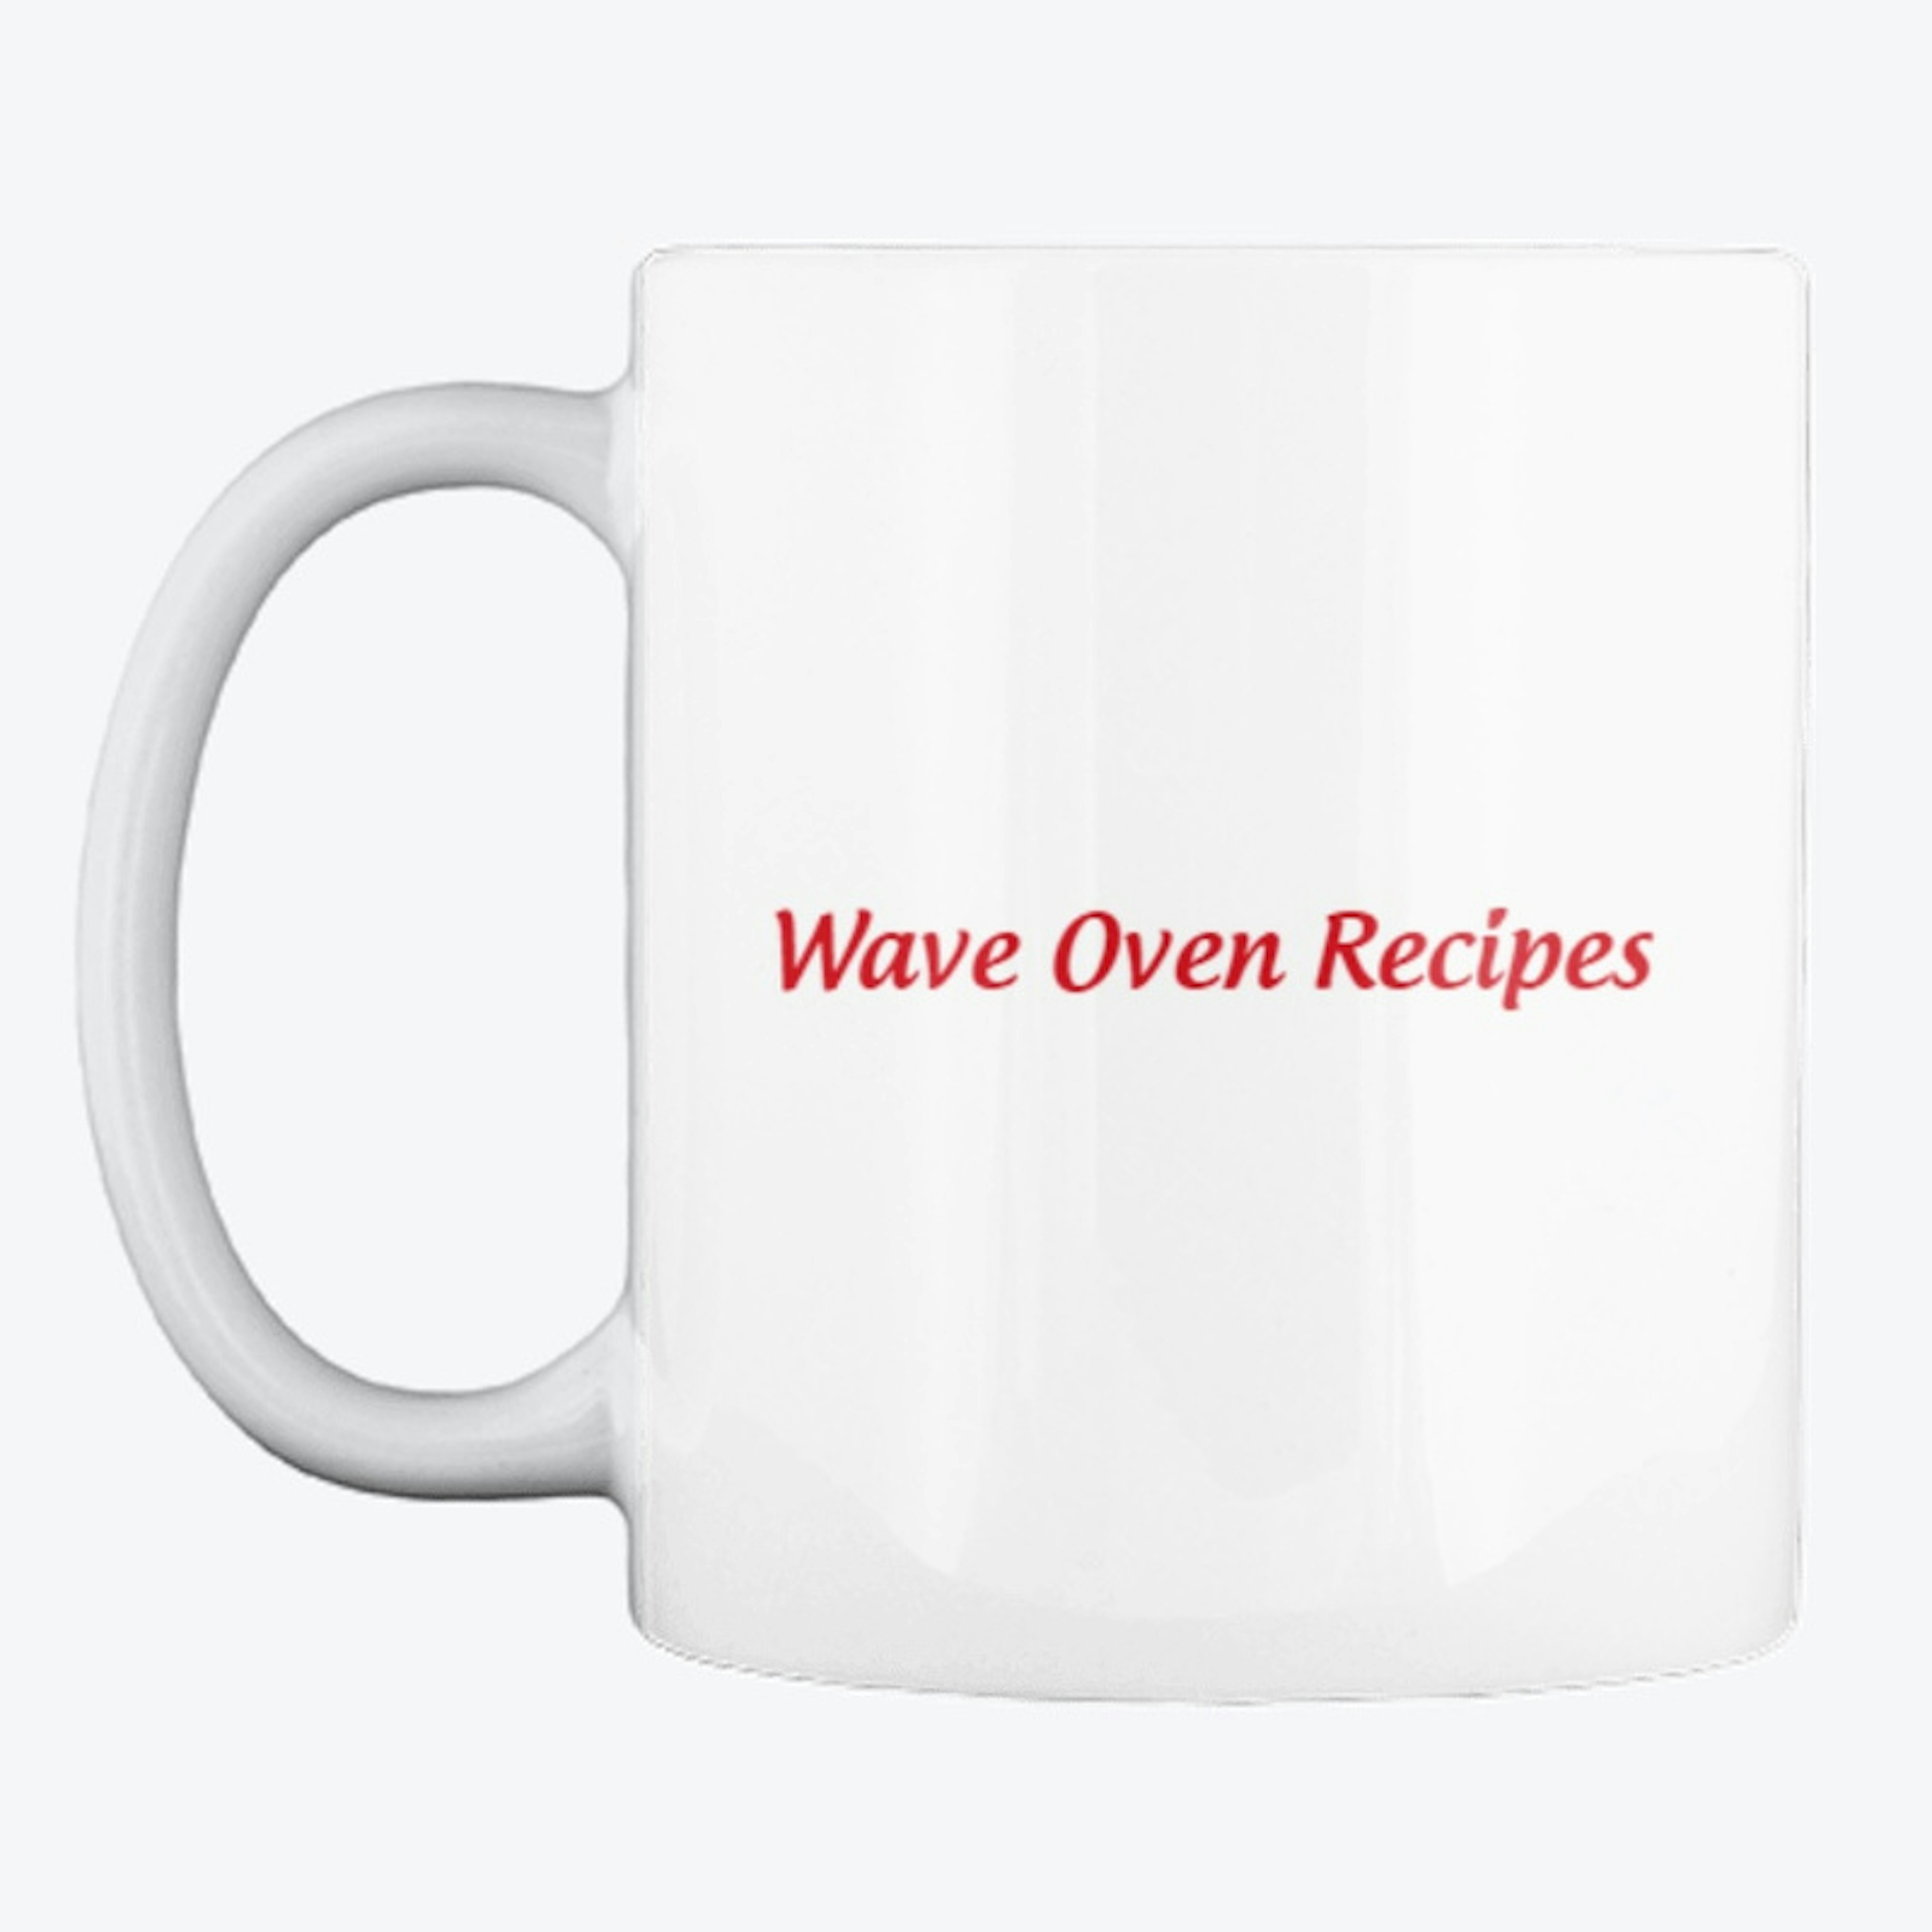 Wave Oven Recipes Mugs and Phone Cases